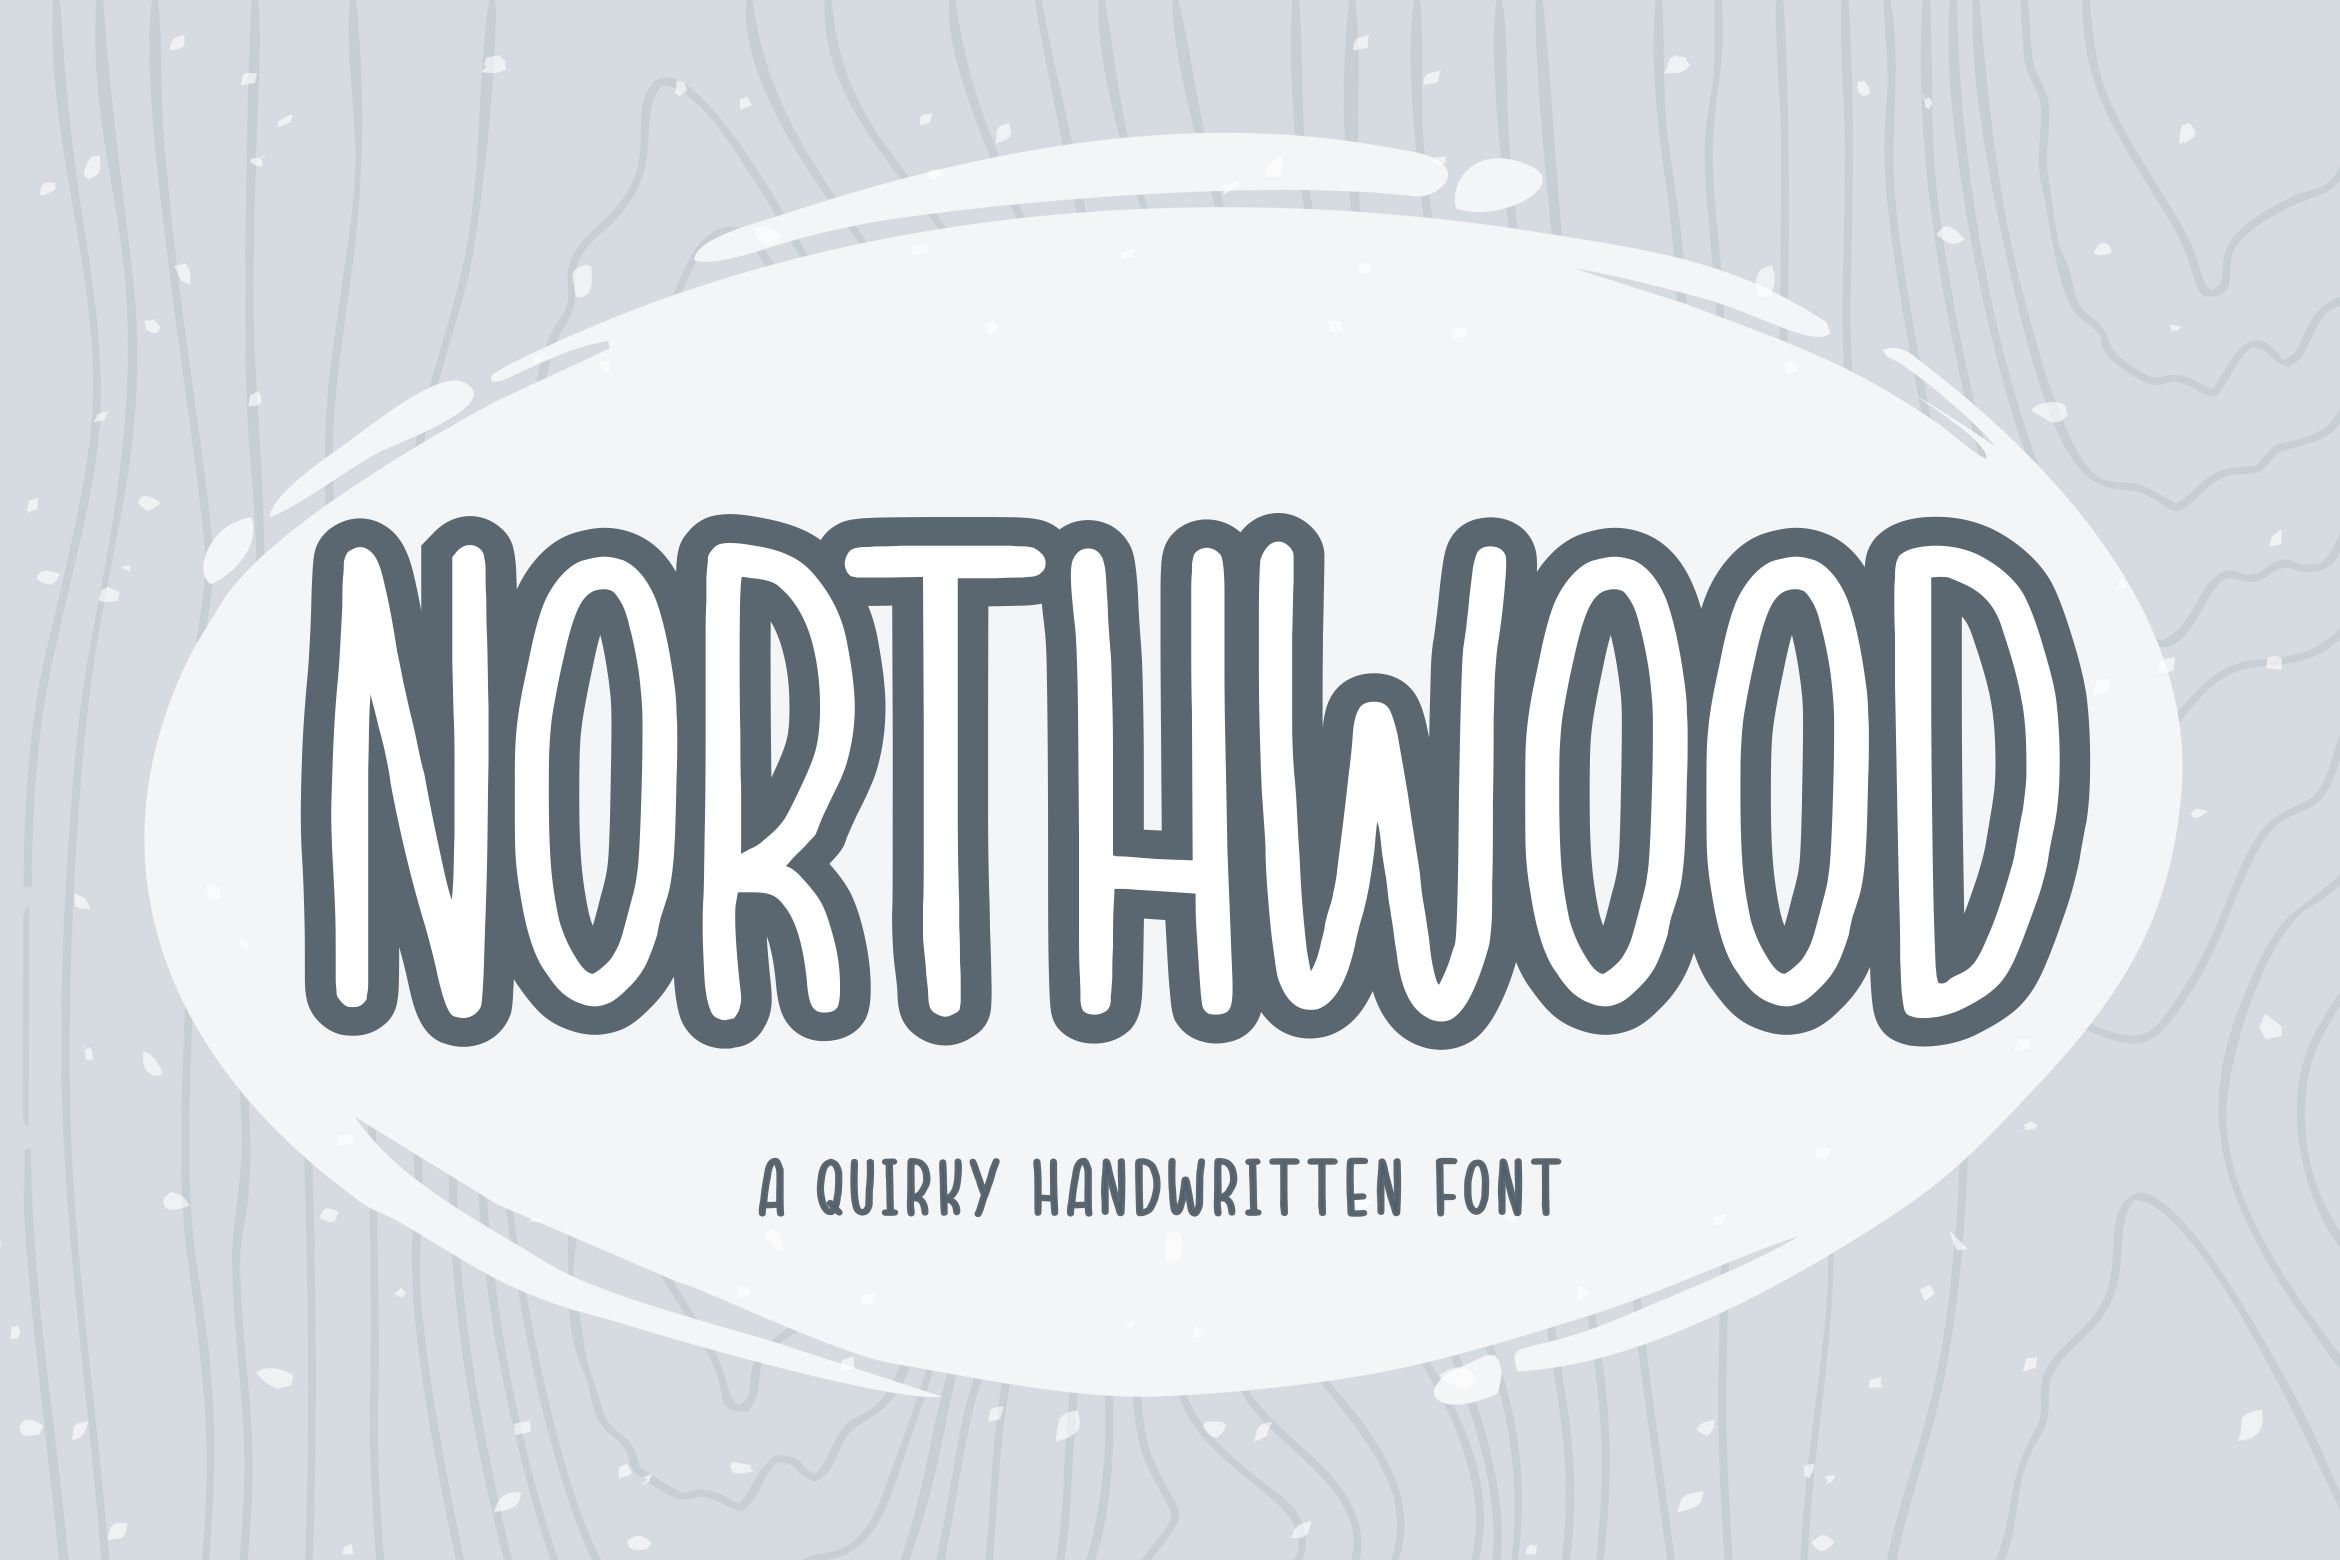 NORTHWOOD - QUIRKY HANDWRITTEN FONT cover image.